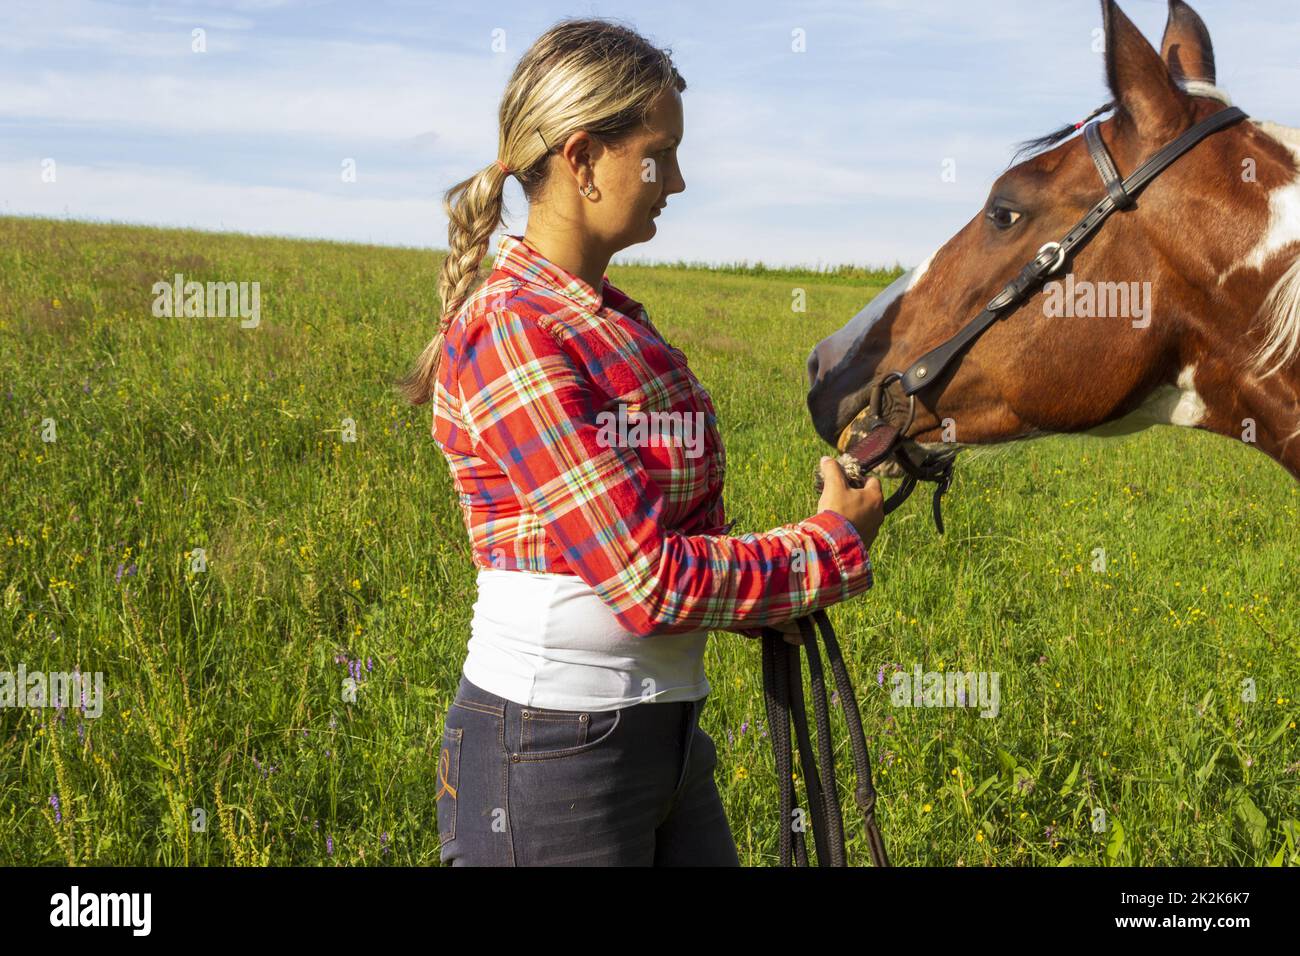 Young girl looks at her horse in grass Stock Photo